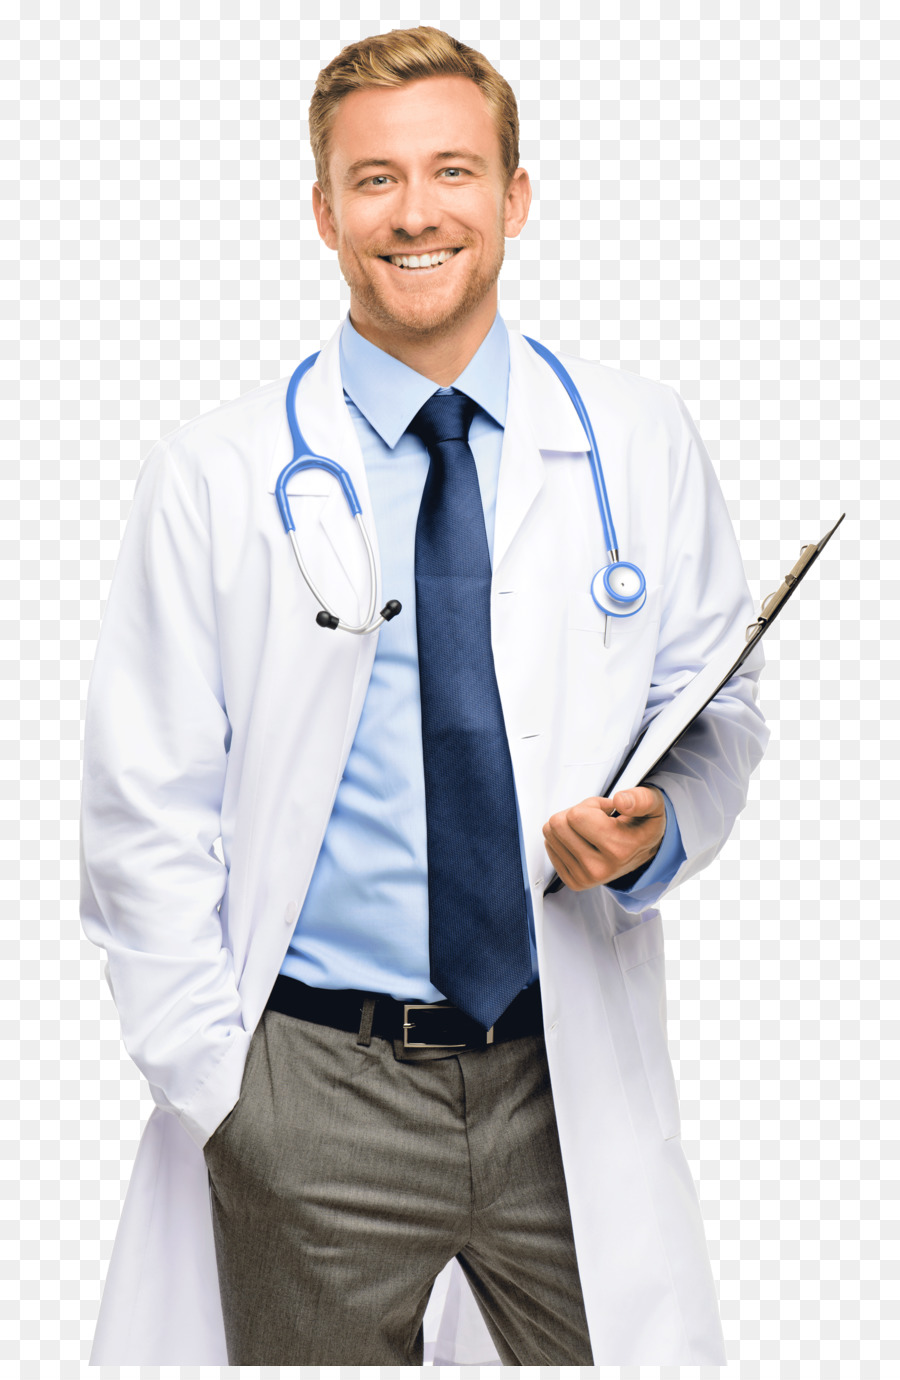 Physician Uniform Scrubs White coat Medicine - Foreign doctor material png download - 4548*6902 - Free Transparent Physician png Download.